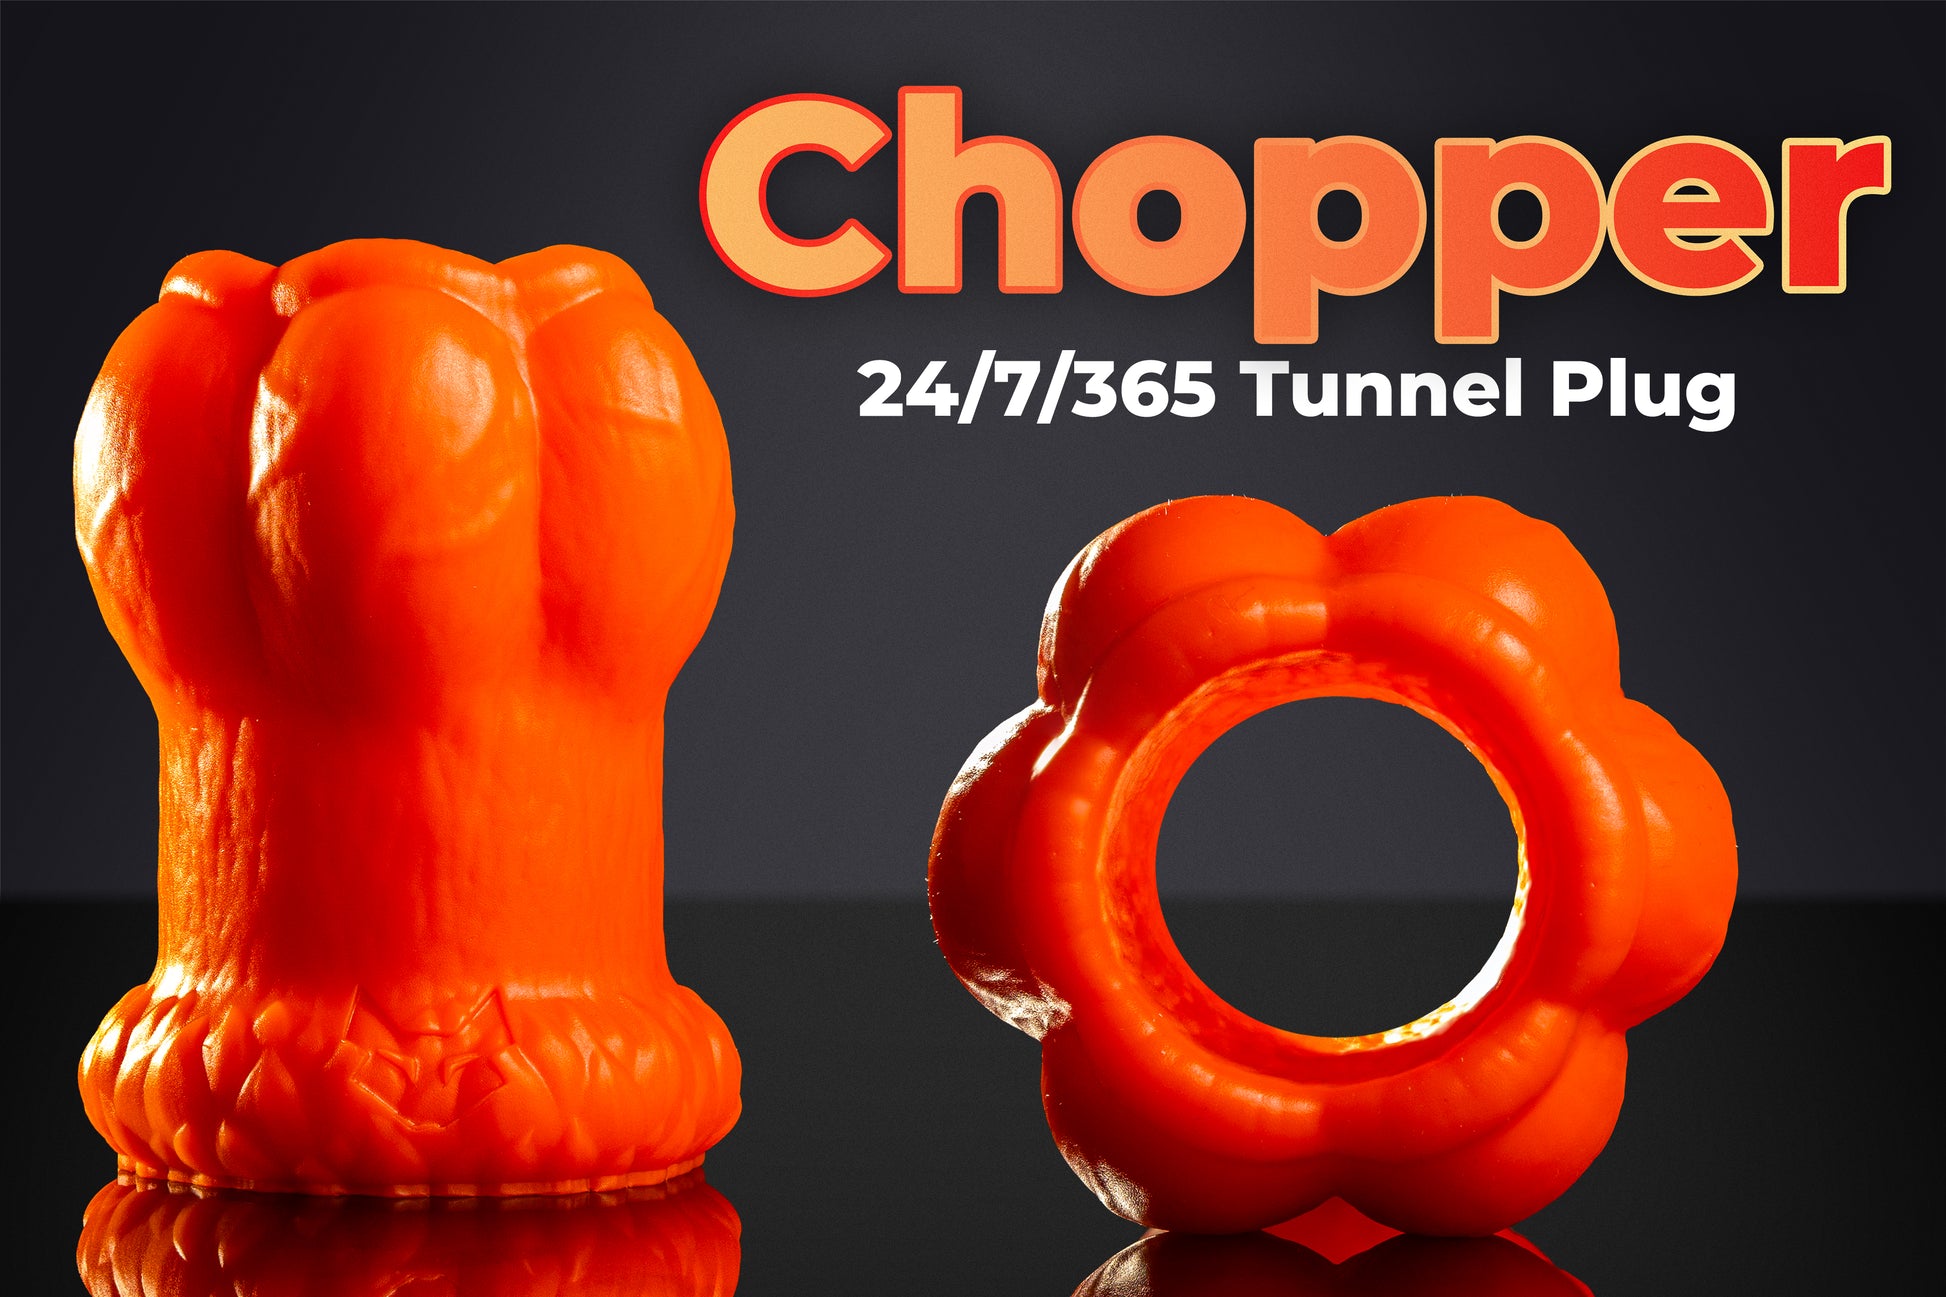 Chopper the tunnel plug product image with product name